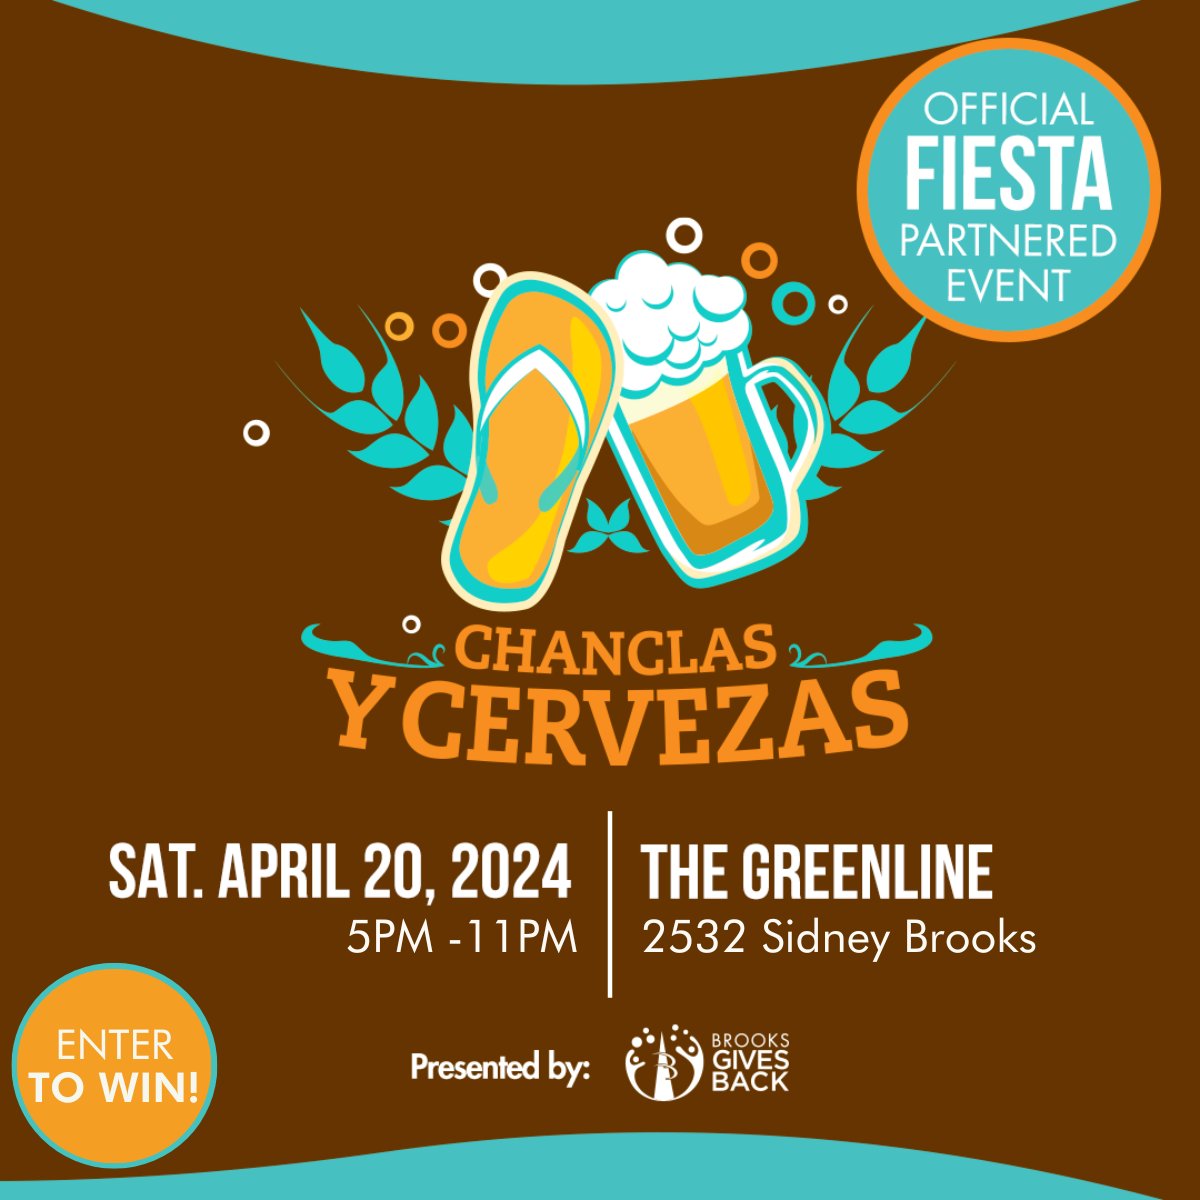 Join Chanclas y Cervezas at The Greenline Park on April 20th for a family-friendly evening of food, games, live music, and cervezas! Test your chancla-throwing skills and enter to win a grand prize pack. Don't miss out! t.dostuffmedia.com/t/c/s/135464